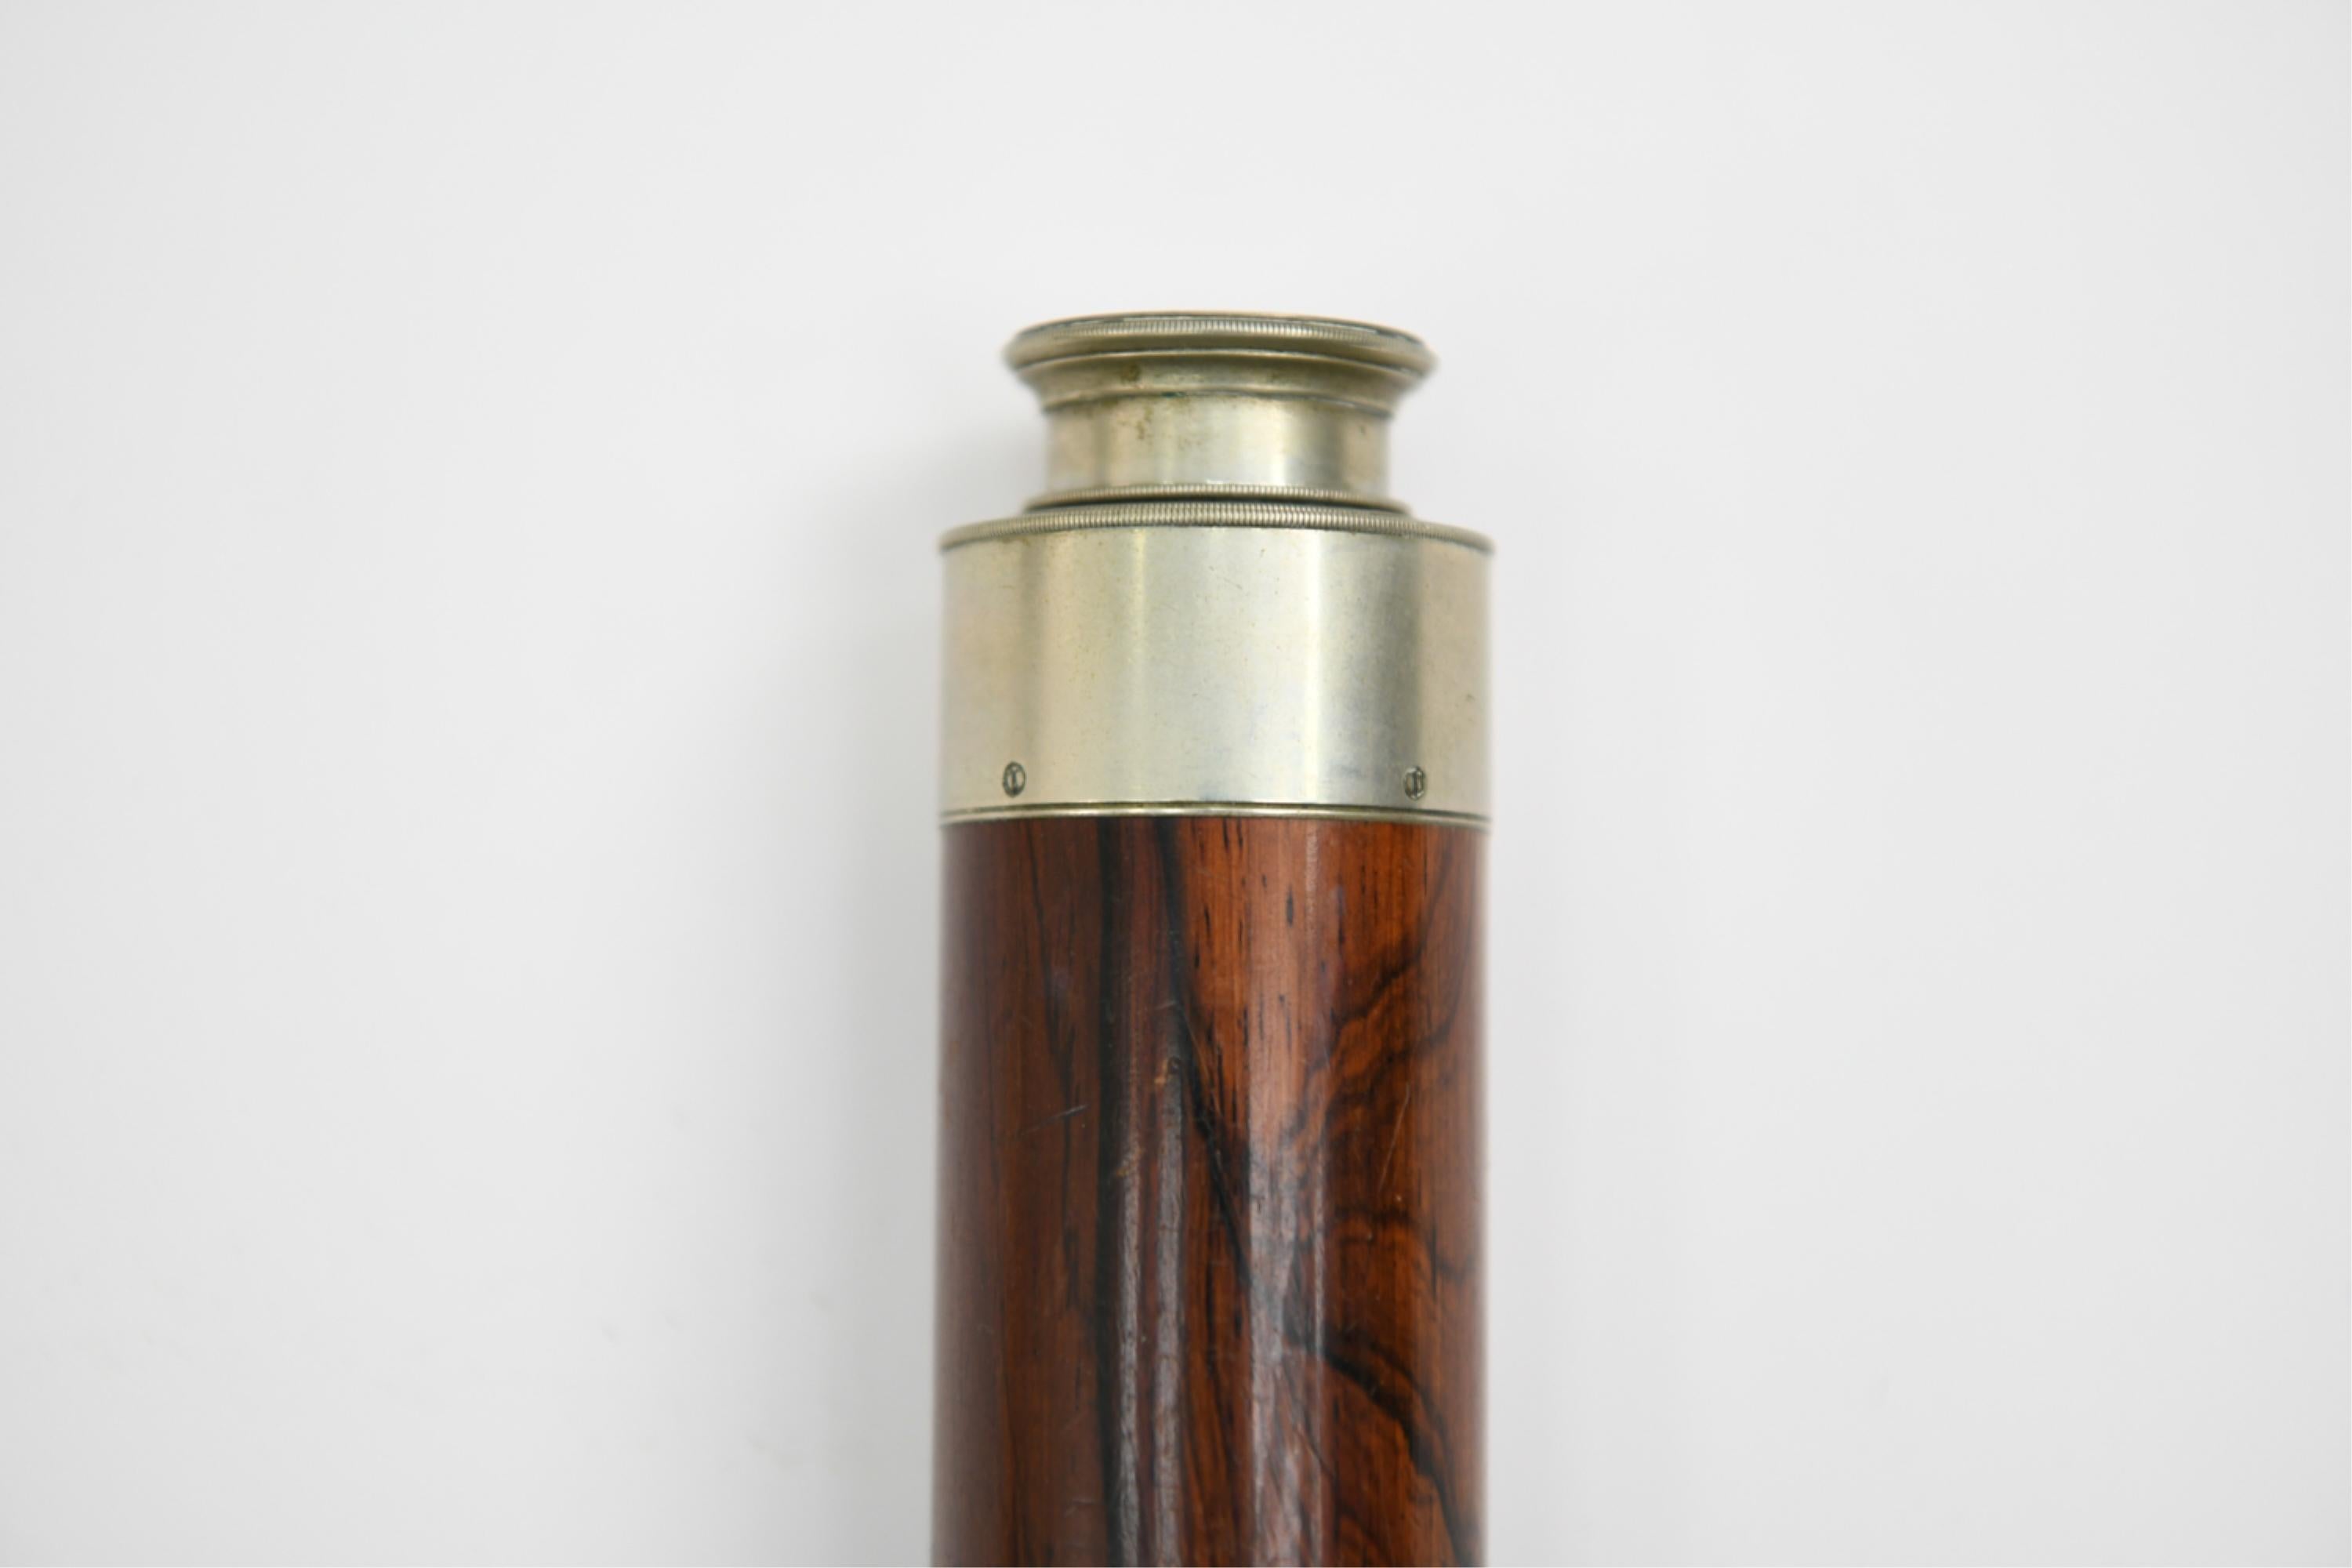 D.E. Wood Inscribed Nautical Telescope & Compass with Rosewood Barrel, c. 1860s 1